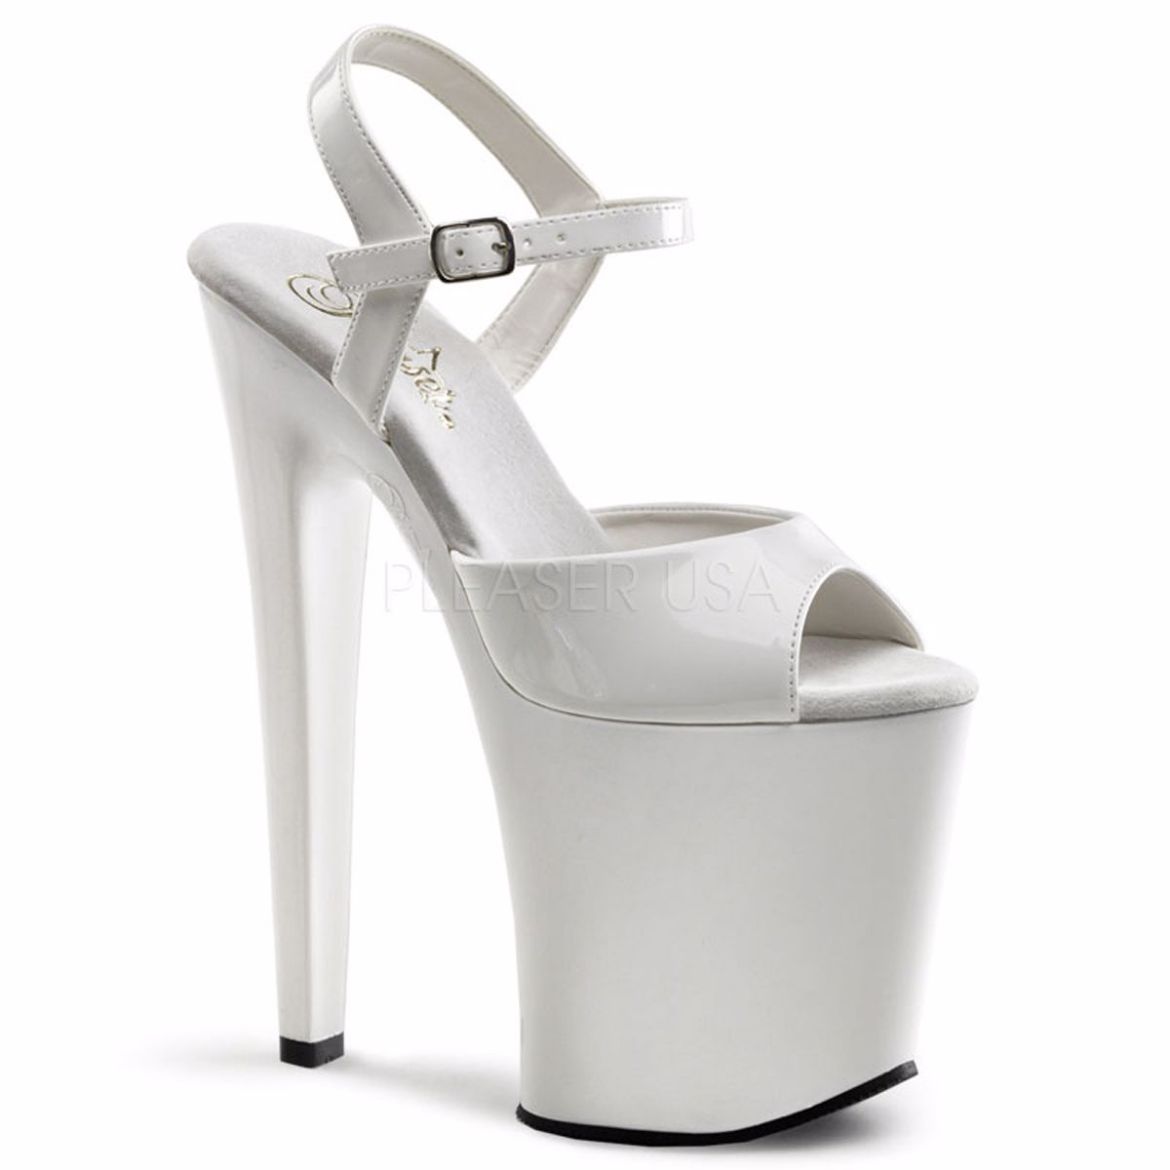 Product image of Pleaser Xtreme-809 White Patent/White, 8 inch (20.3 cm) Heel, 4 inch (10.2 cm) Platform Sandal Shoes